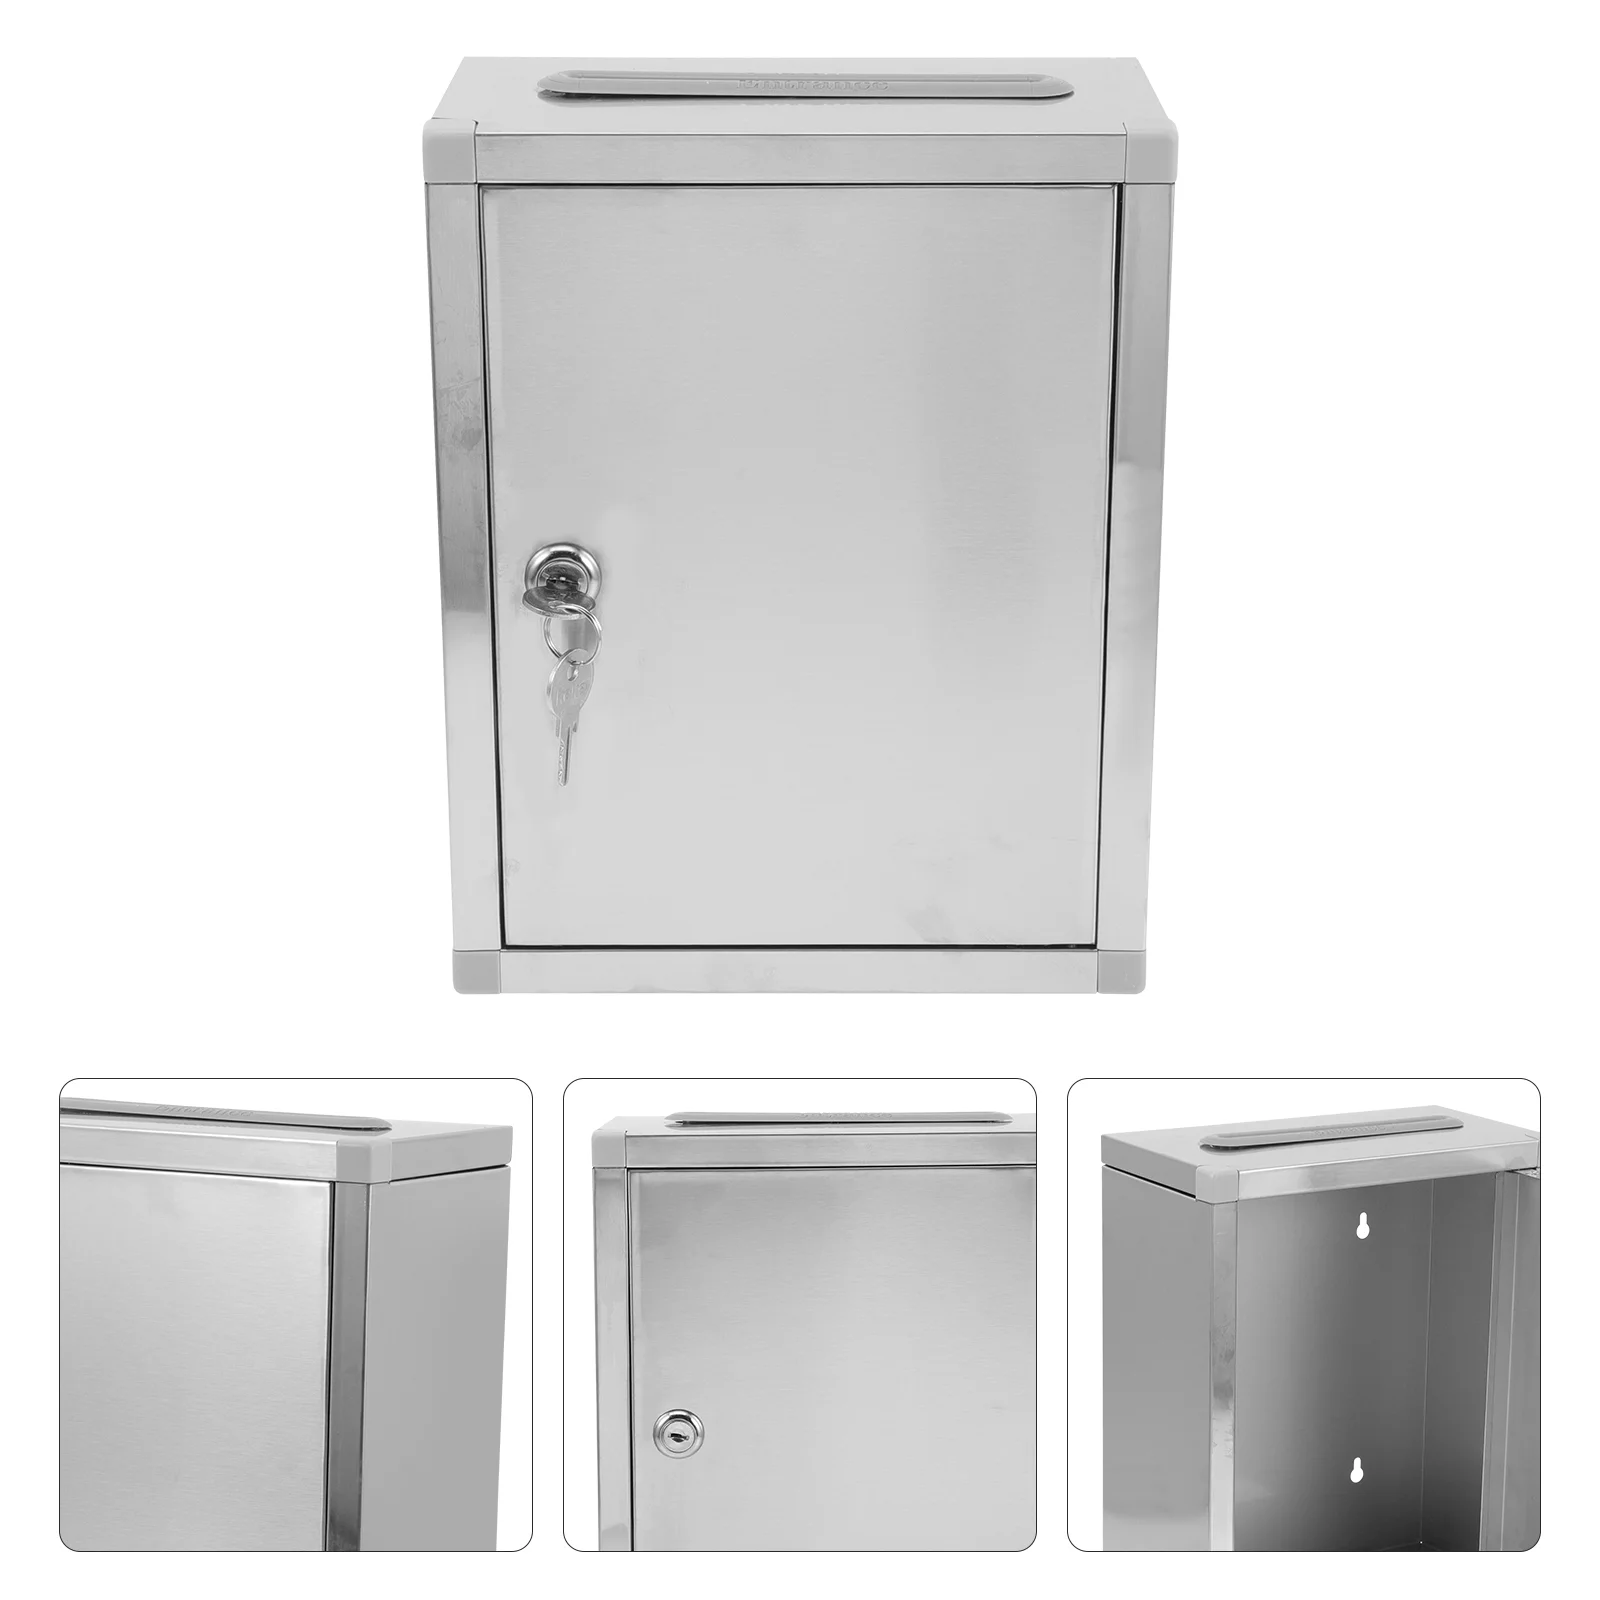 

Large Lock Box Stainless Steel Mailbox Check-in Voting Storage Safe 27x21cm Public Reports Letter Complain Silver Office